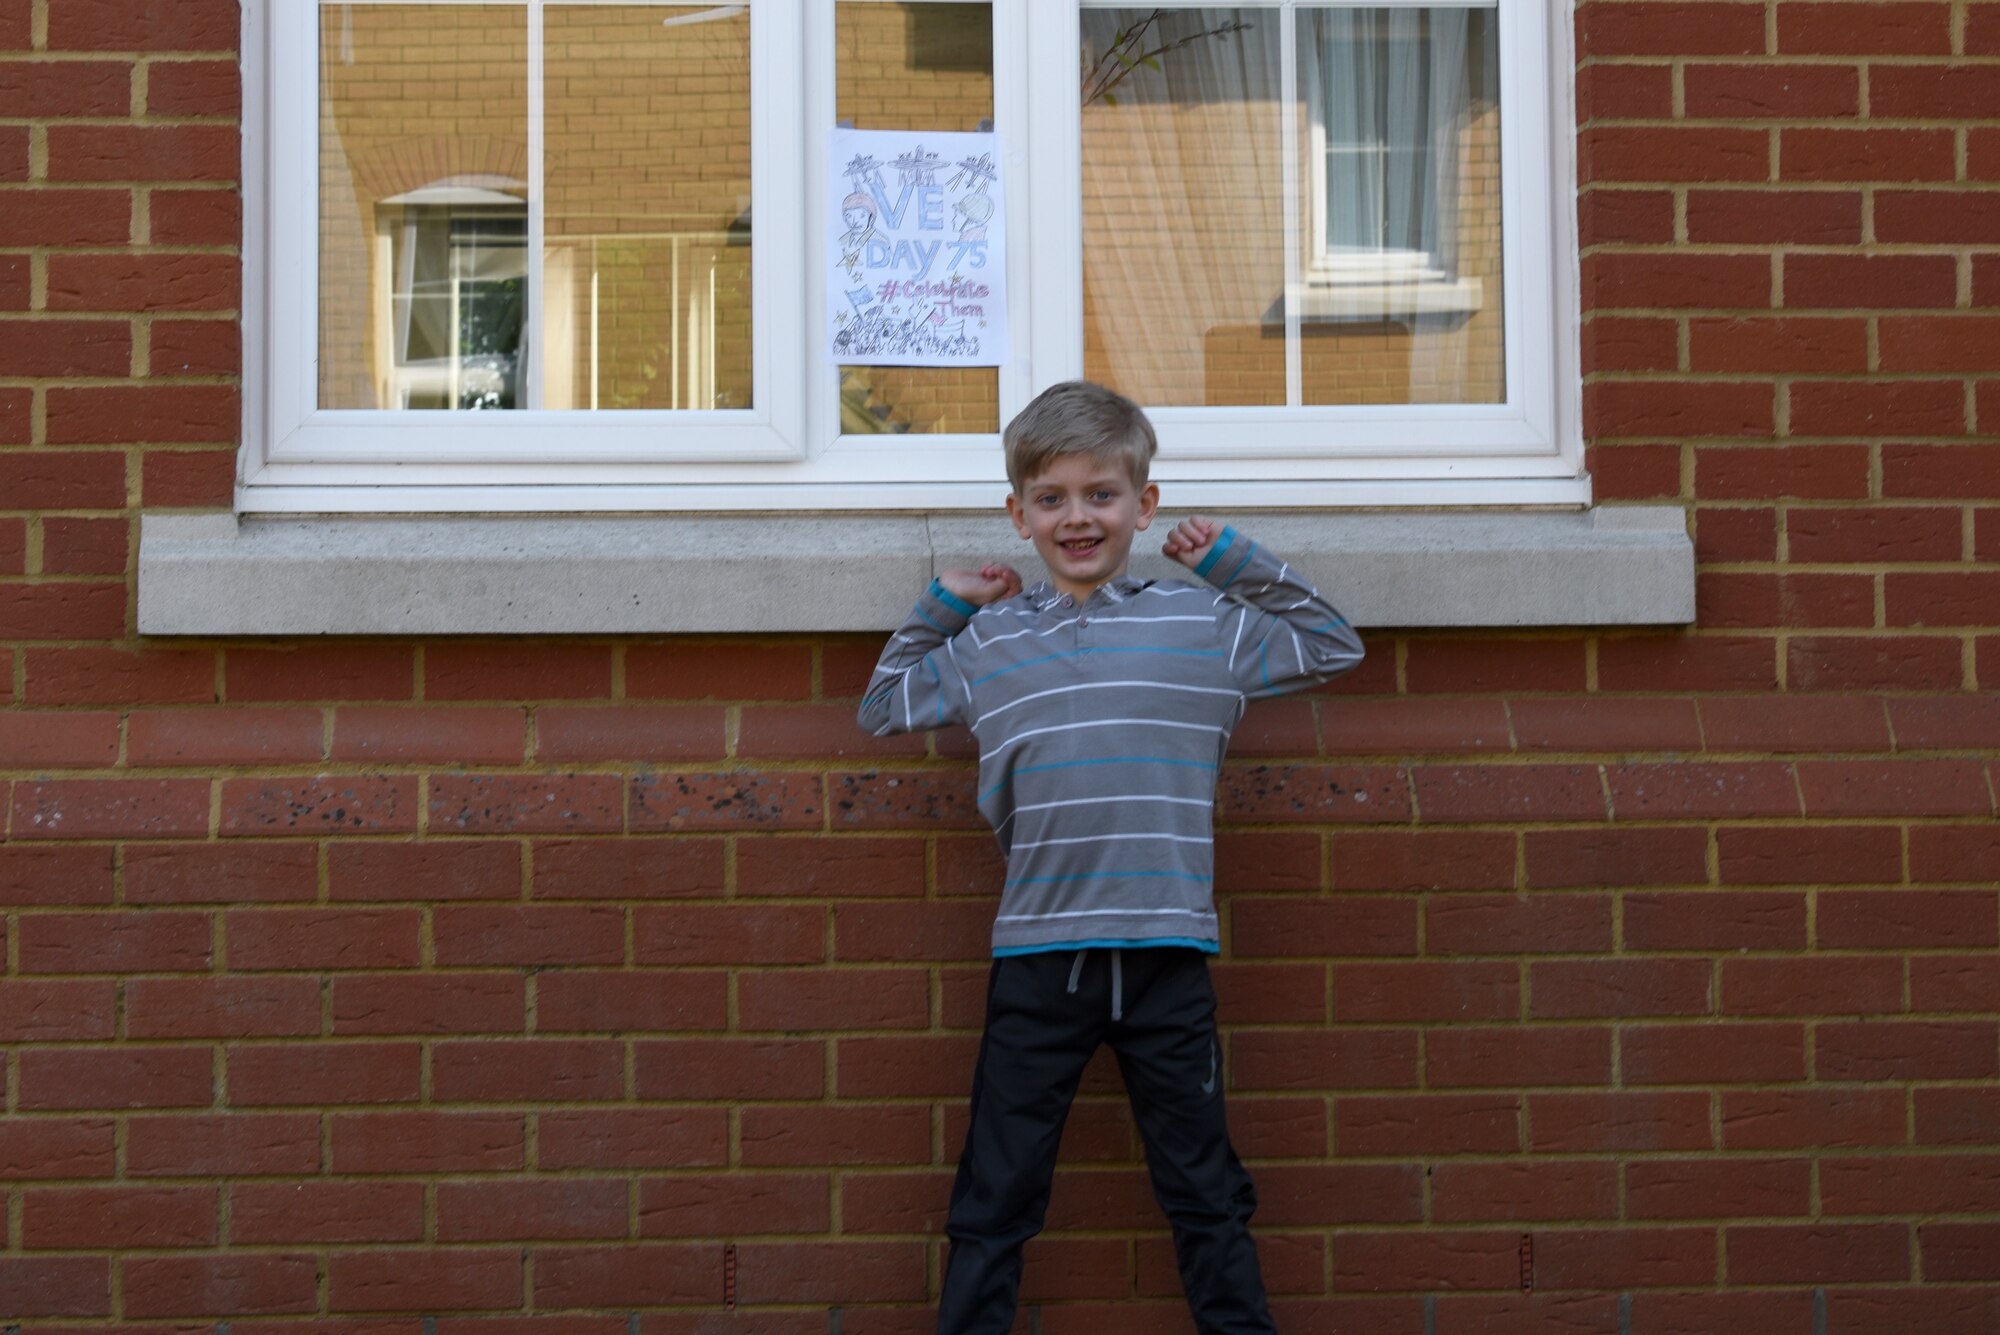 A child of a U.S. Air Force Airman displays Victory in Europe Day artwork in their window in Liberty Village at Royal Air Force Lakenheath, England, May 6, 2020. On May 8, the U.K. will join the U.S. and allies around the world to mark the 75th anniversary of VE Day, with virtual programs to avoid the spread of COVID-19. (U.S. Air Force photo by Airman 1st Smith Rhonda Smith)